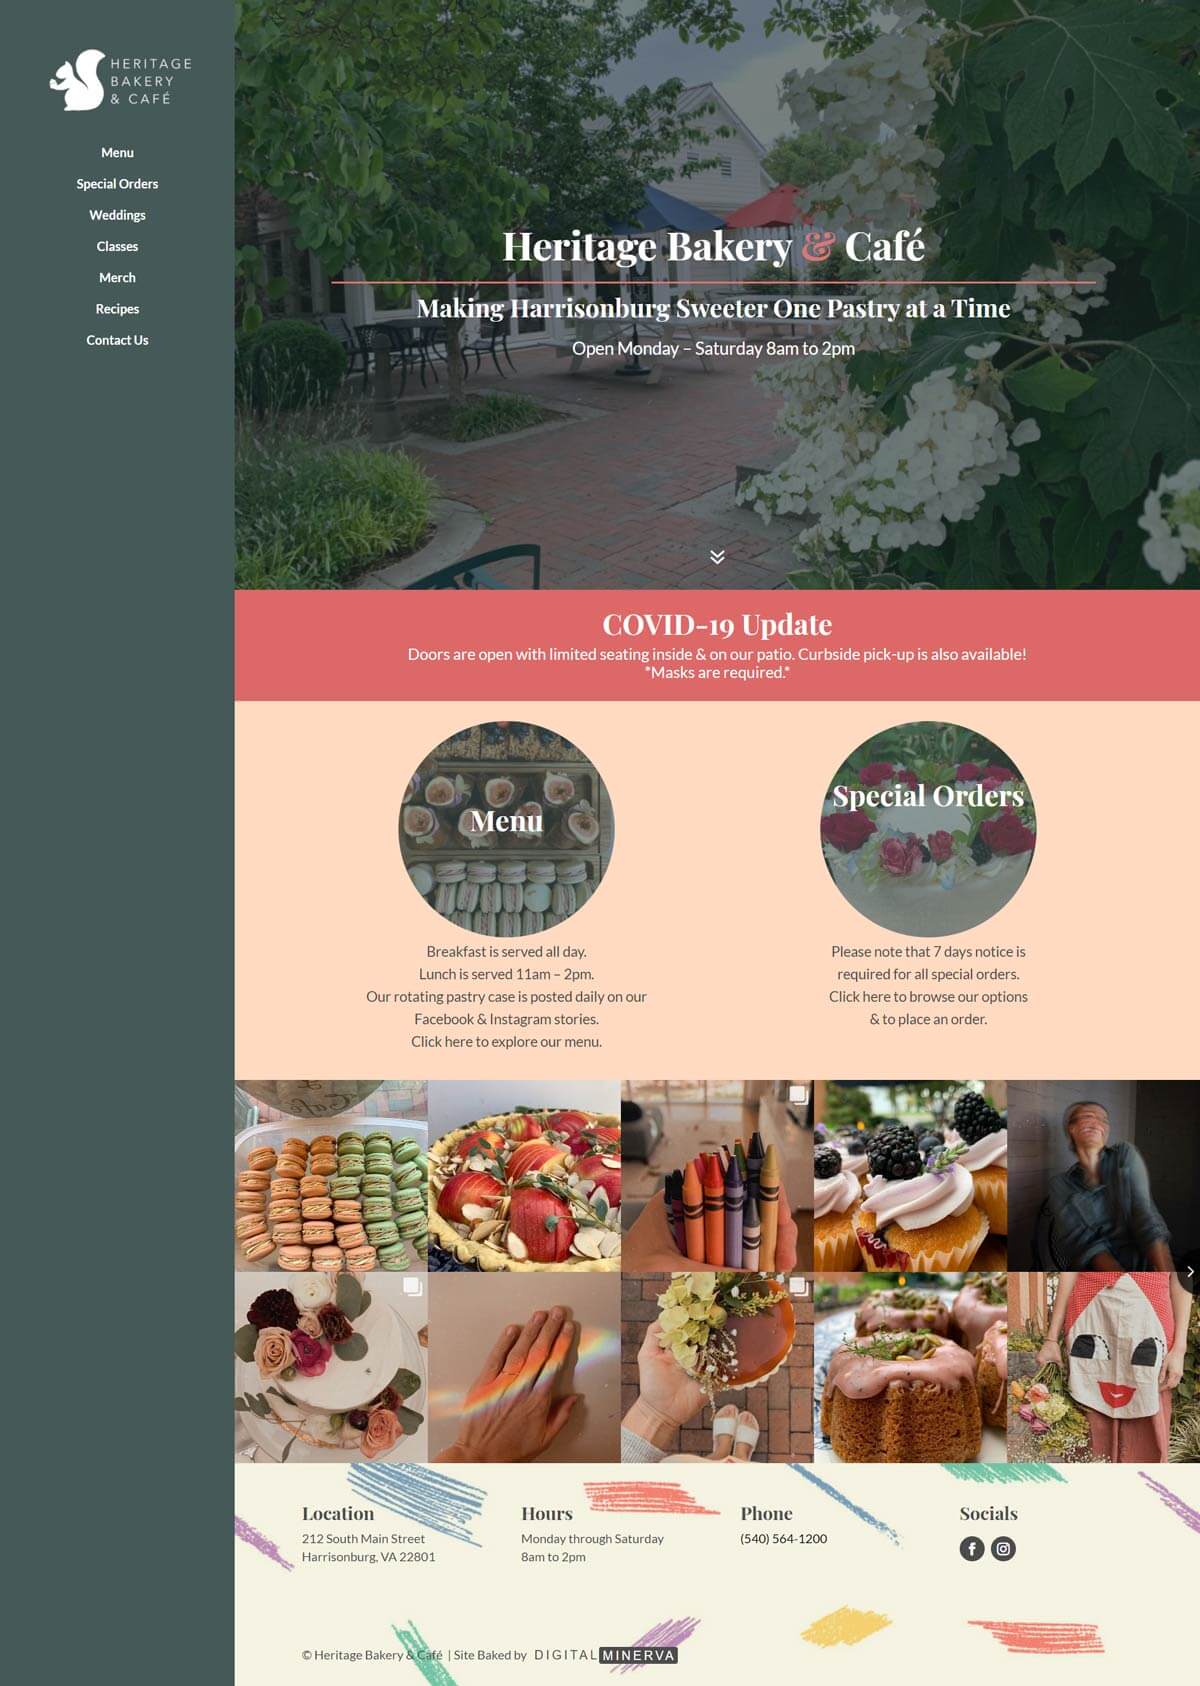 Heritage Bakery and Café homepage design.